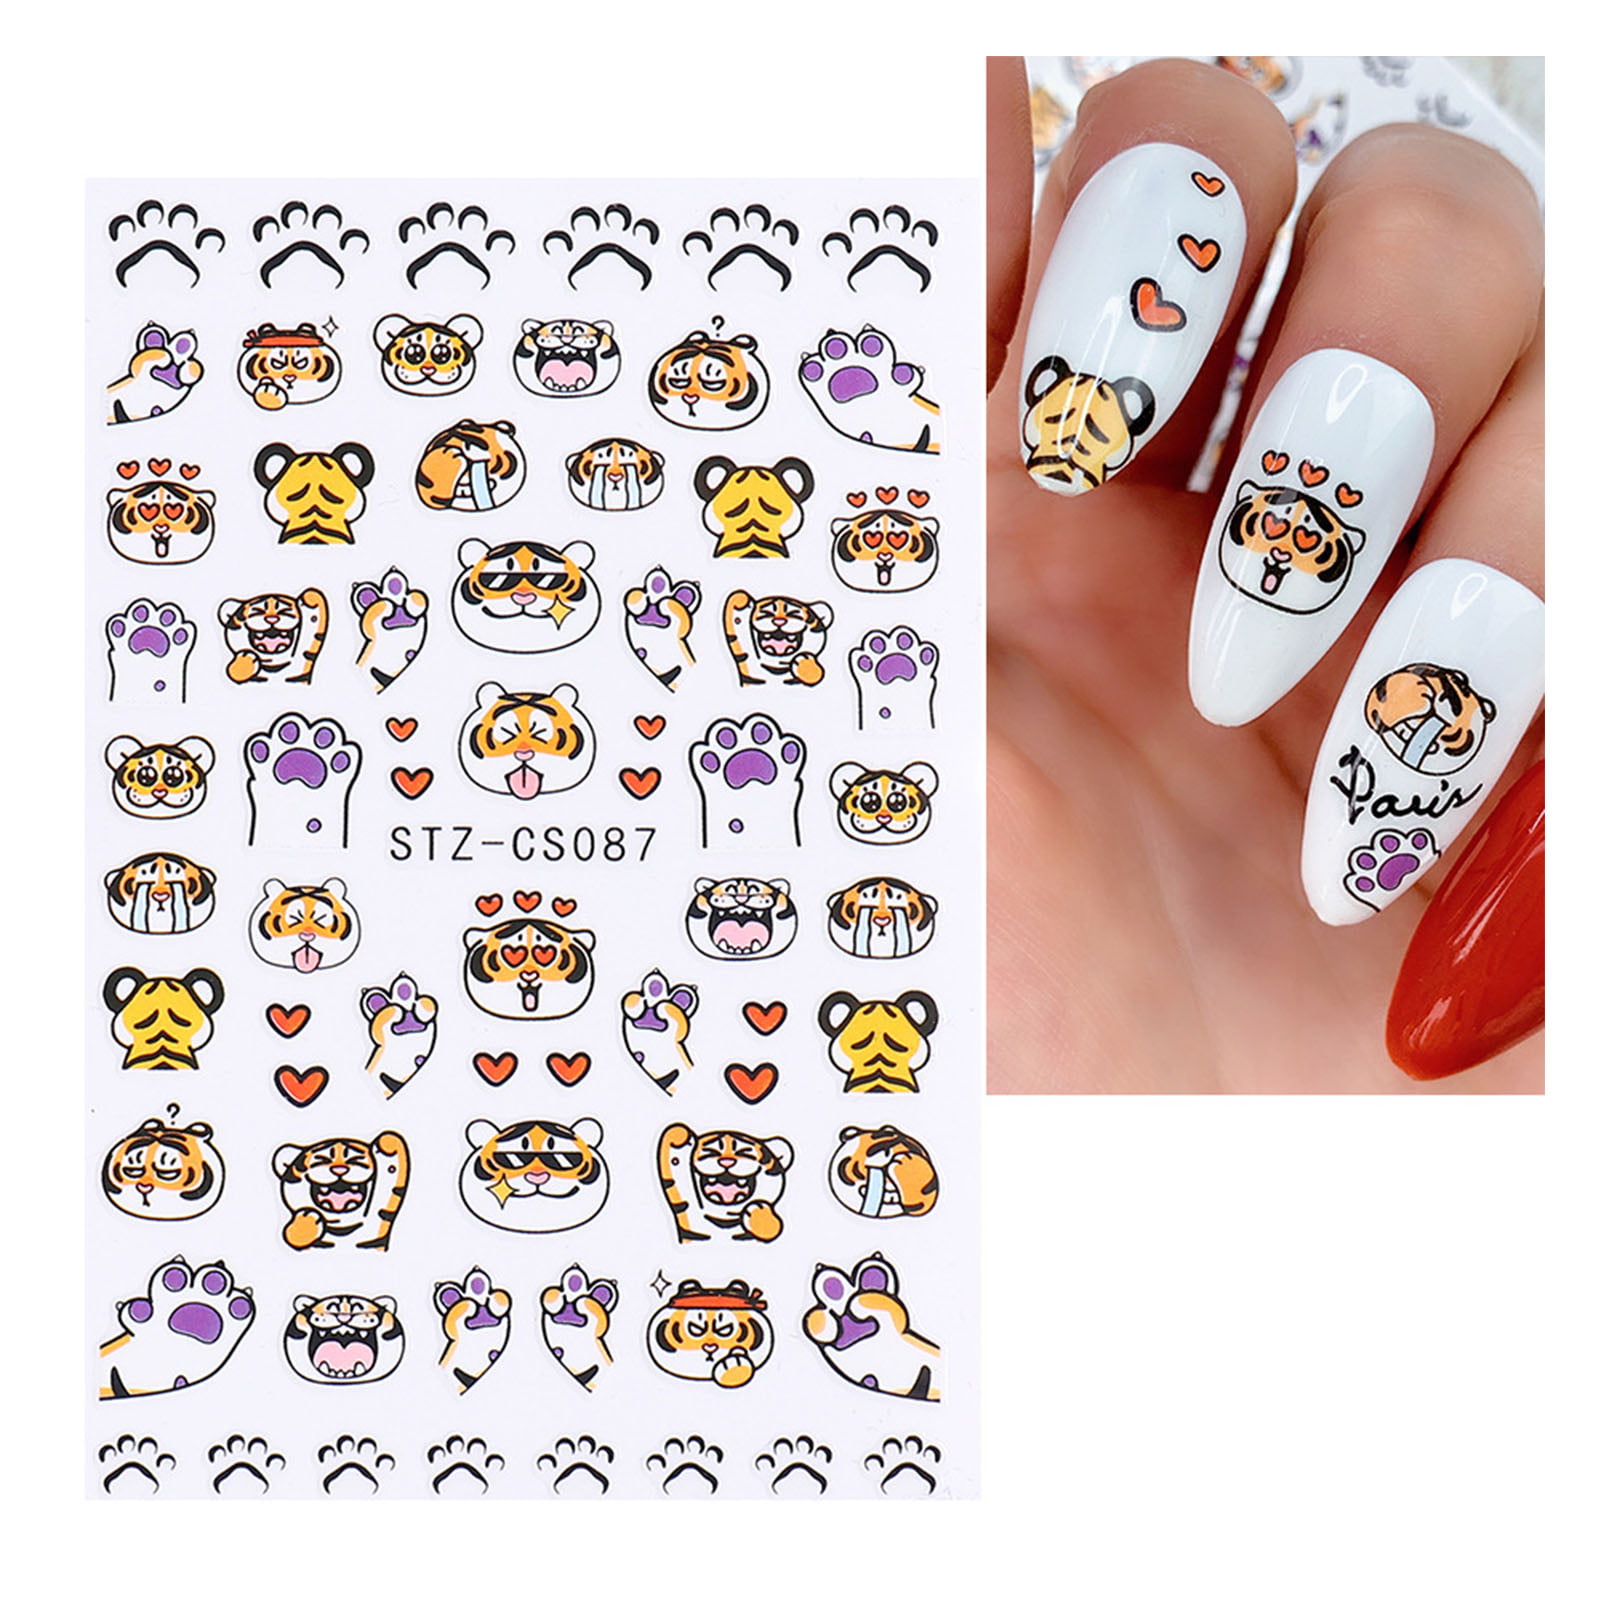 Shop Miss A on Twitter Safe to say we naild it once again  13 new  designs of nail stickers and presson nails are now live shopmissa  shopmissahaul nails nailstrips pressonnails pressons 